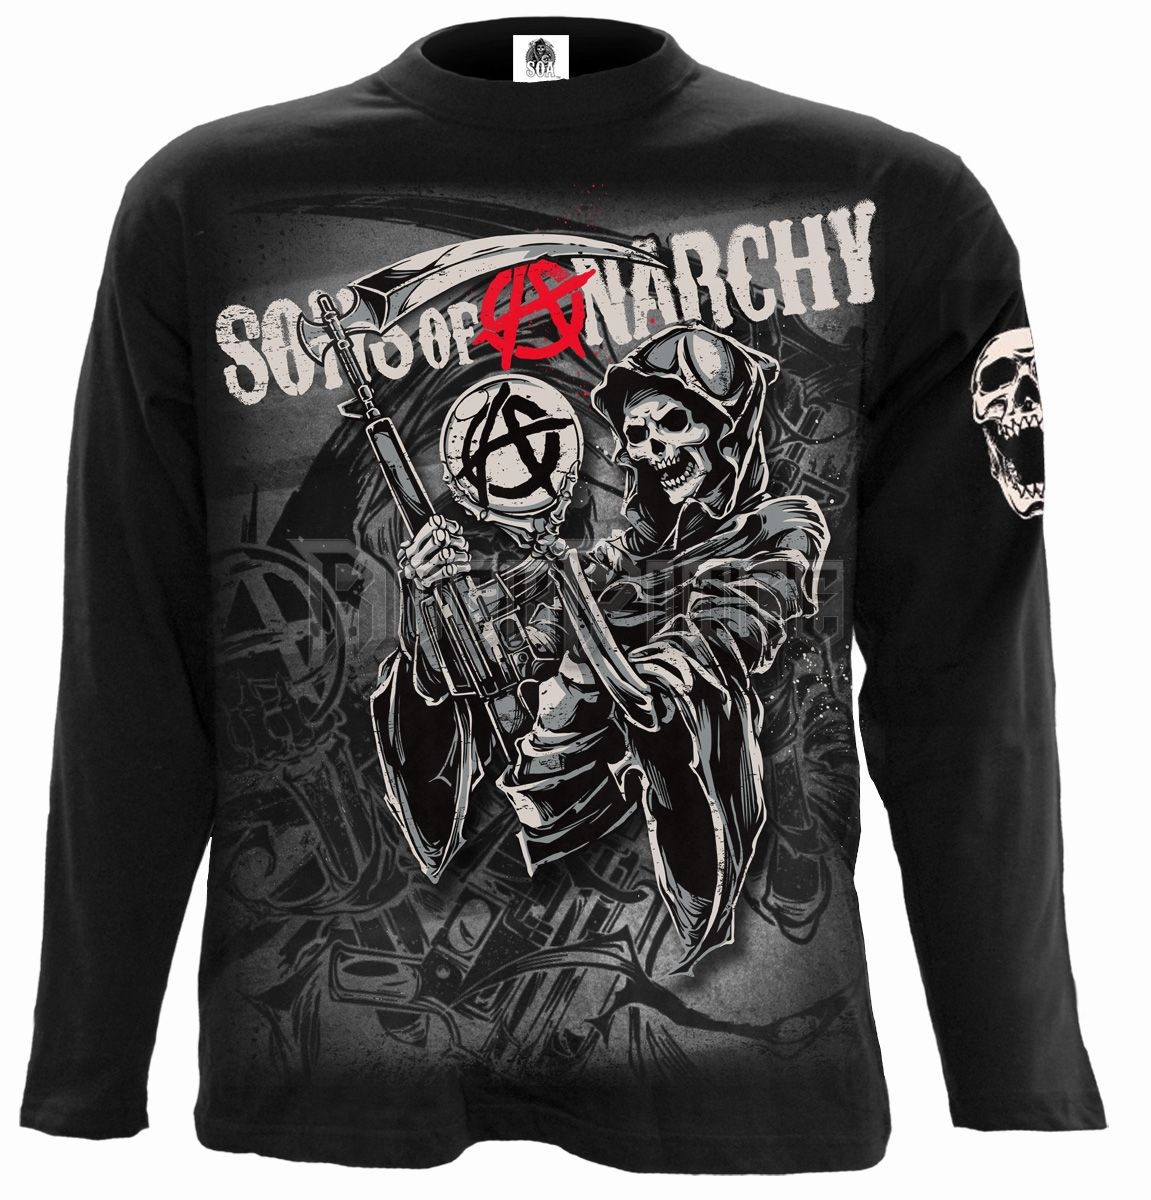 Sons of Anarchy - REAPER MONTAGE - Longsleeve T-Shirt Black - G102M301